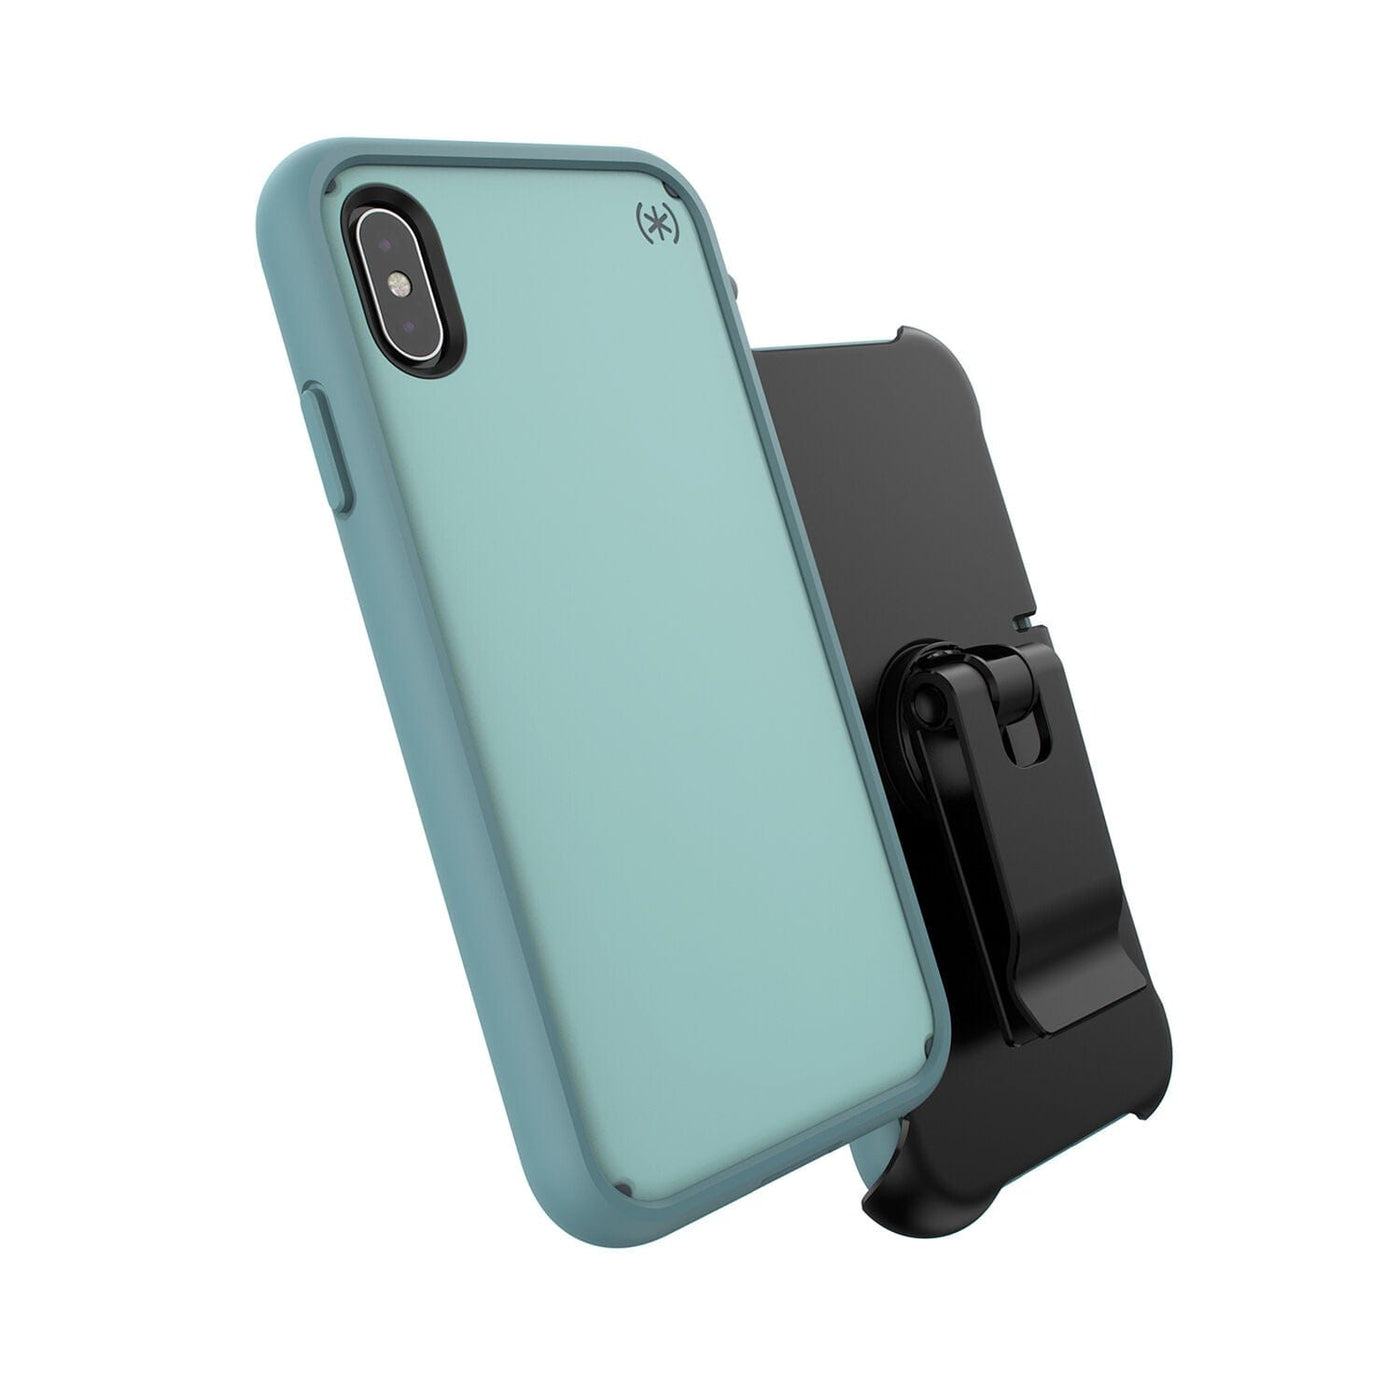 The Best iPhone XS Max Cases and Covers